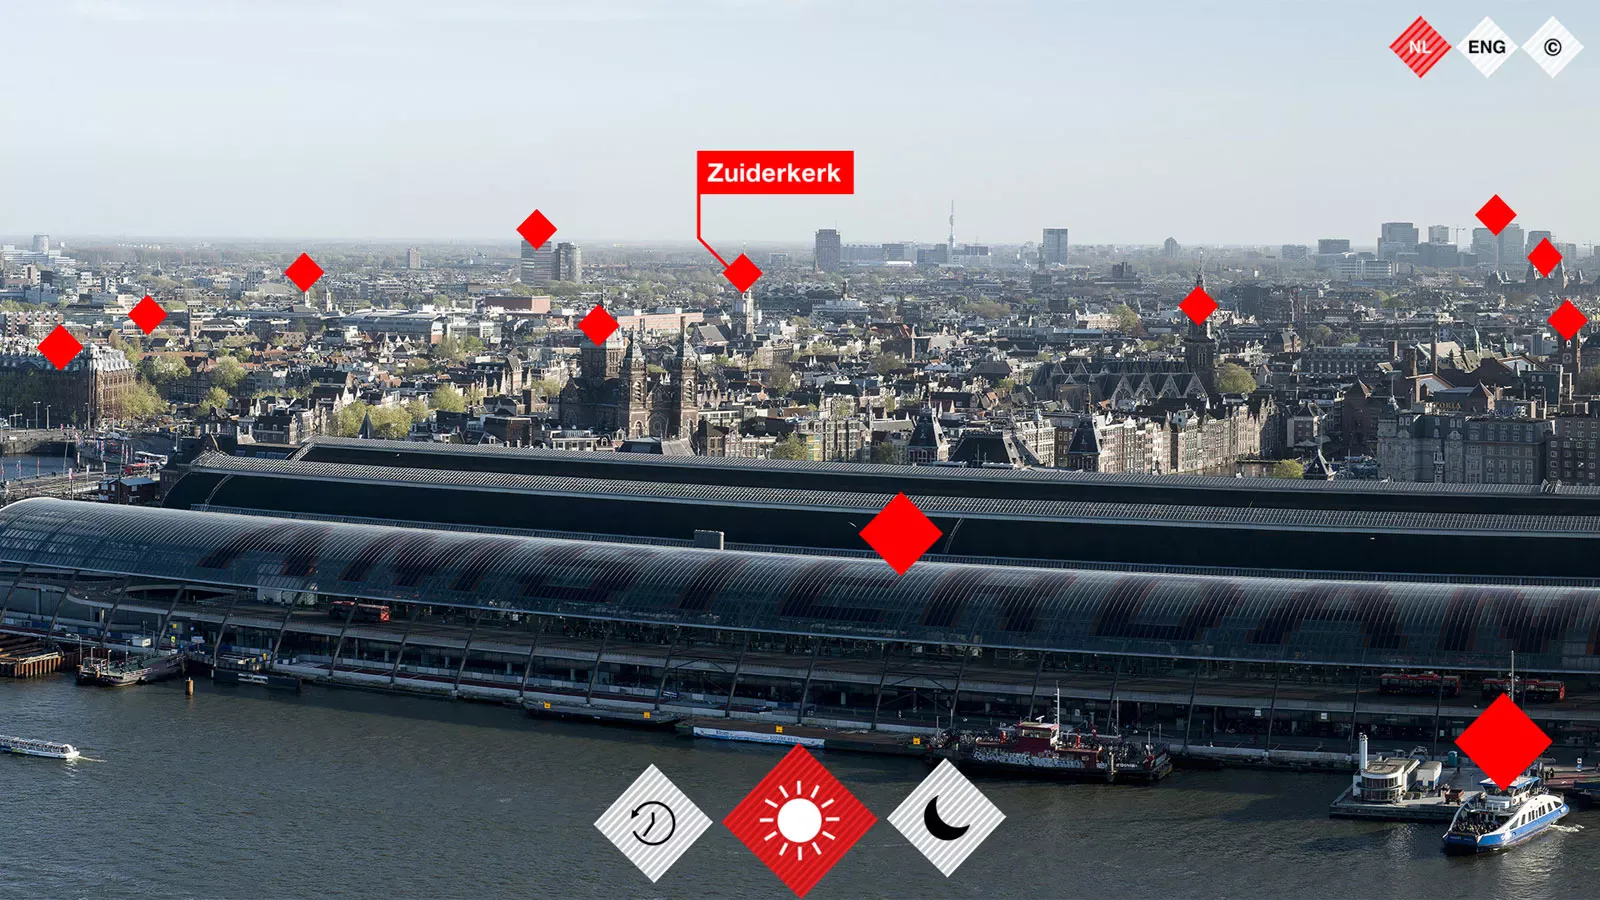 A’DAM LOOKOUT visitor experience